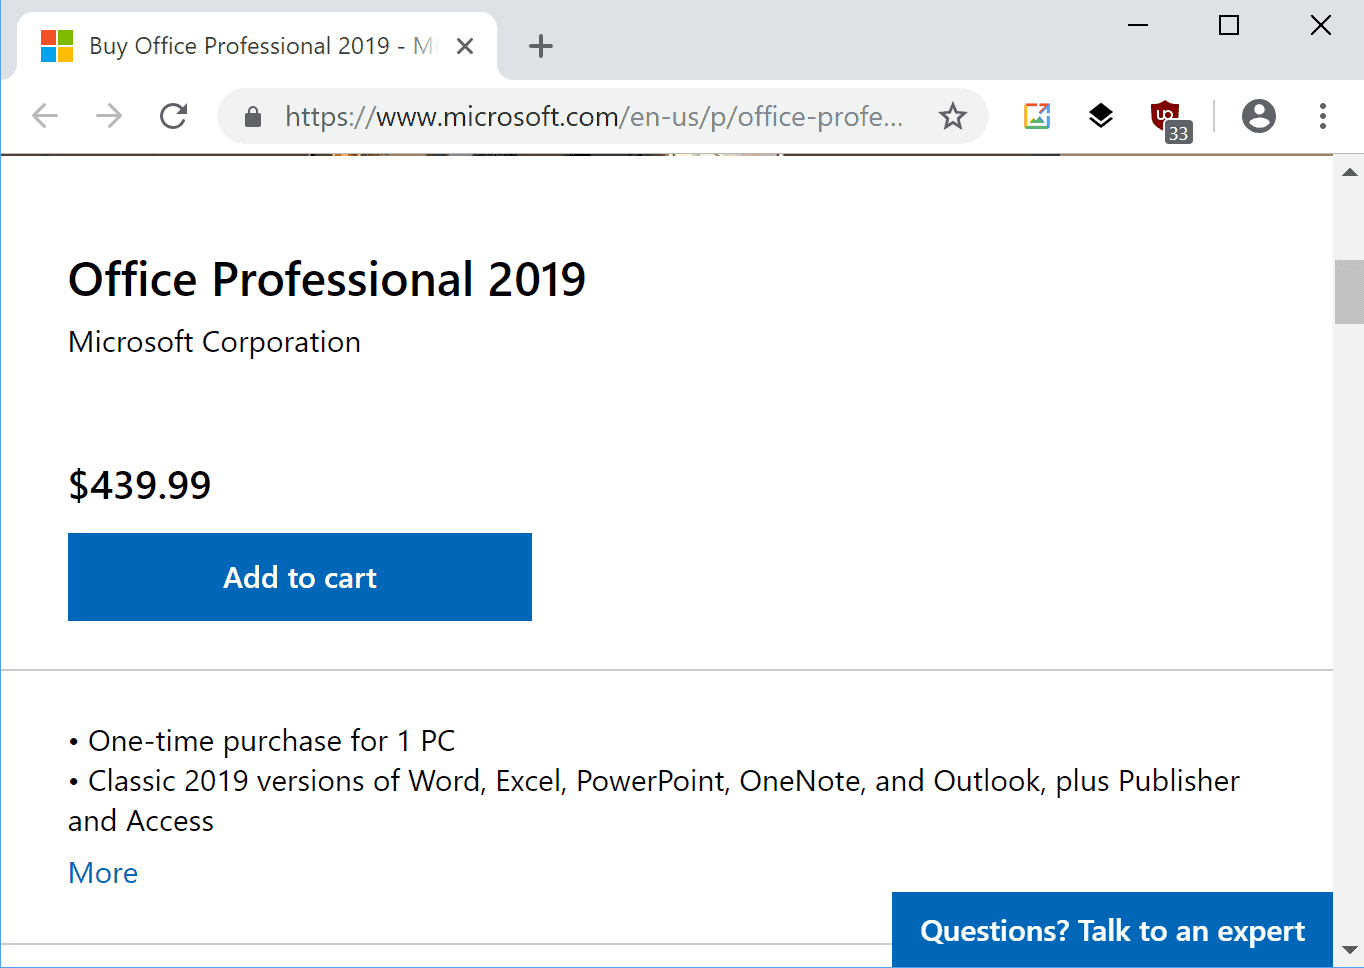 Microsoft wants 9 for Office 2019 Professional